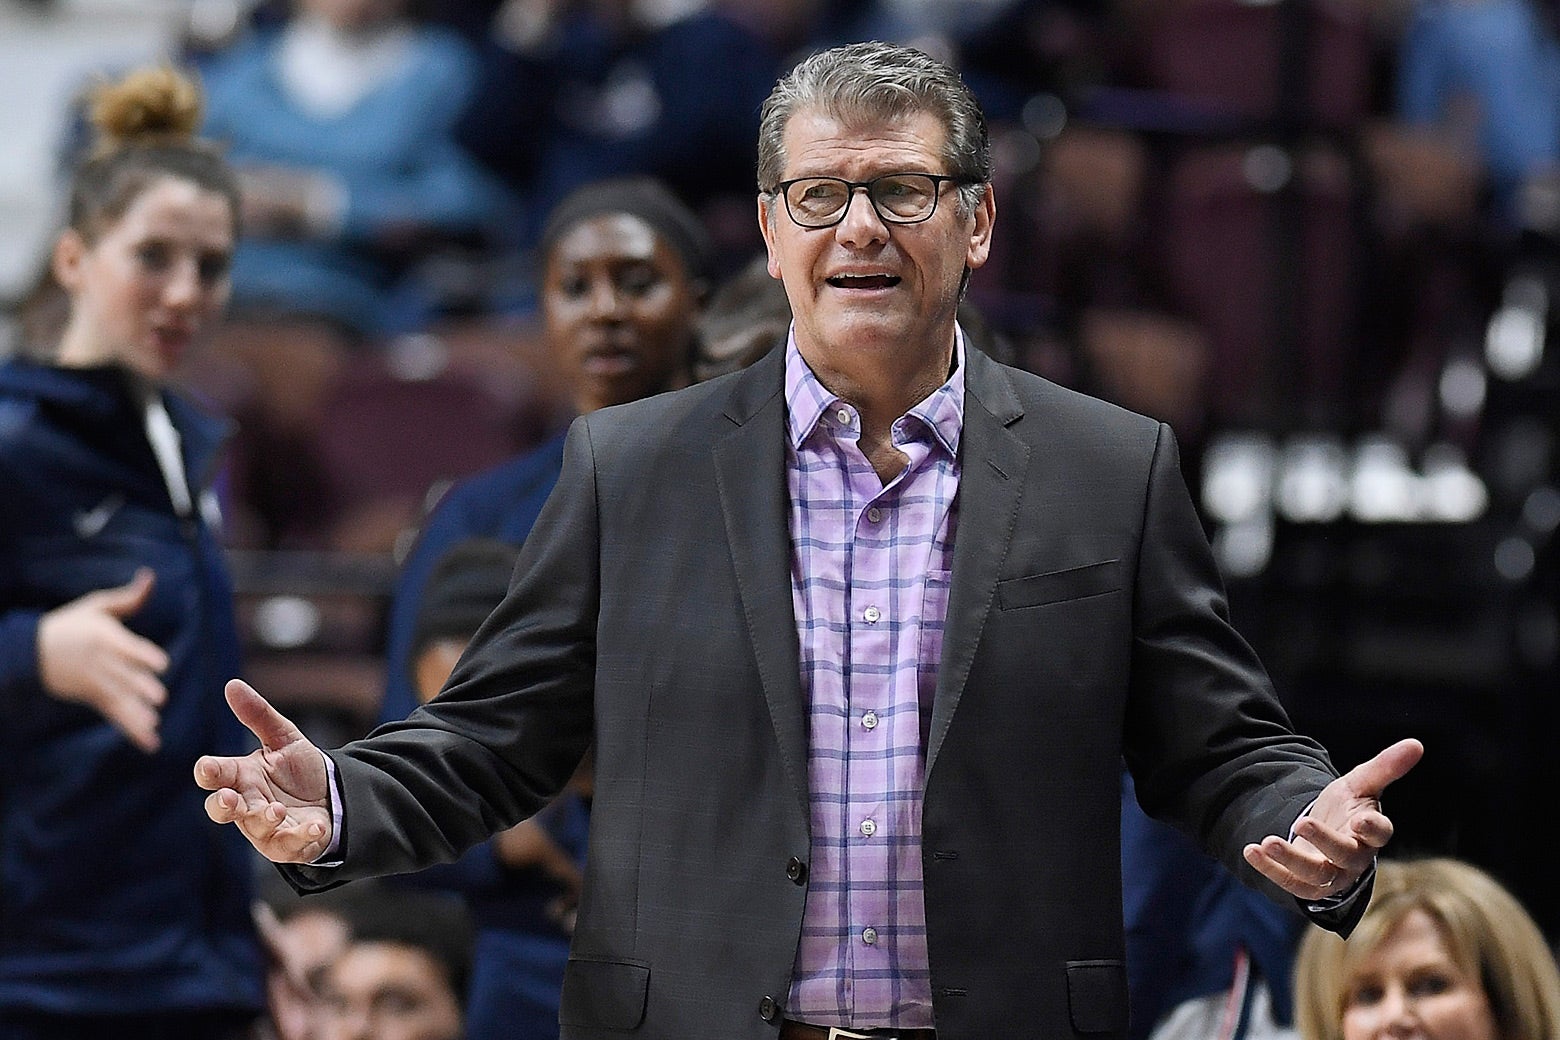 Geno Auriemma standing with his arms outstretched at a basketball game.